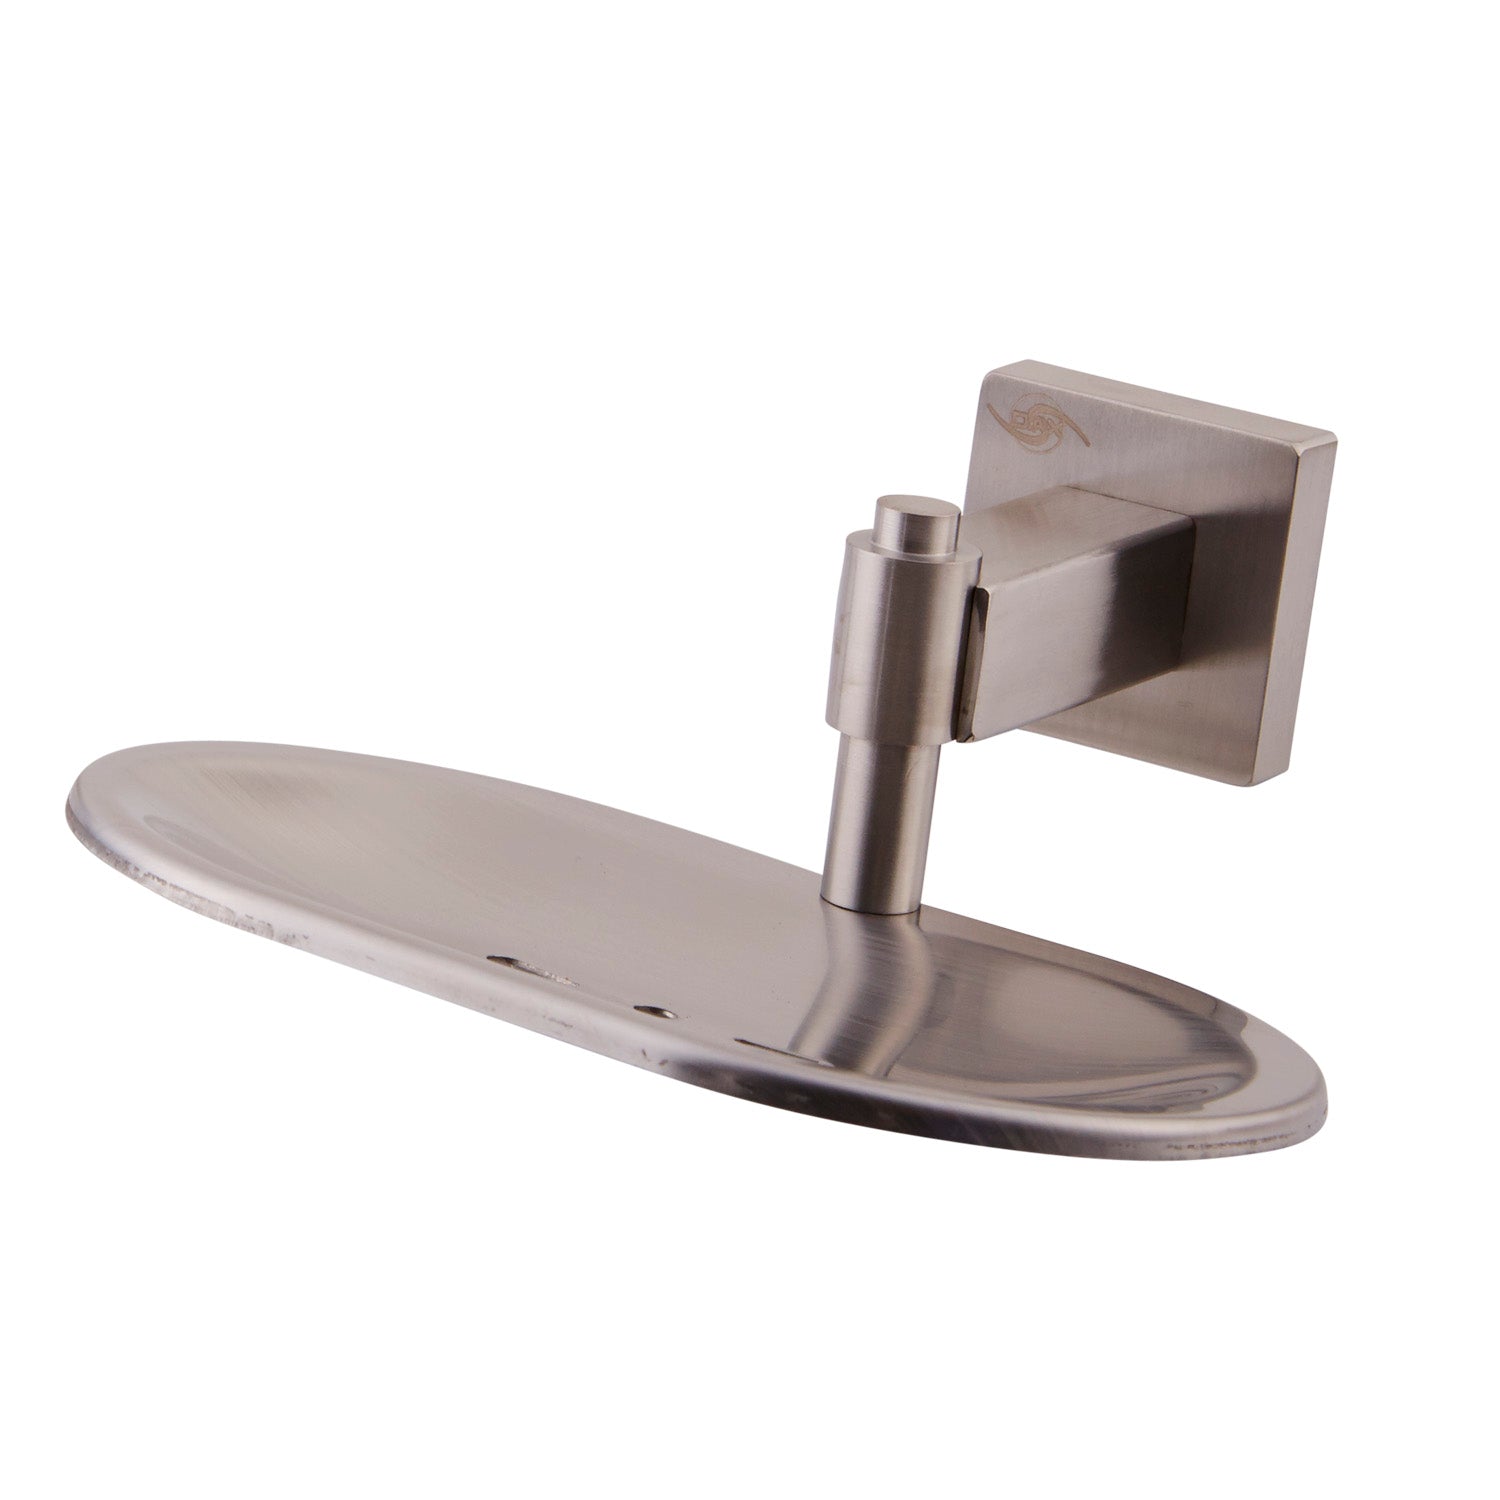 DAX Stainless Steel Soap Dish, Wall Mount Tray, Polish Finish, 6-1/8 x 2-7/16 x 5-15/16 Inches (DAX-G0105A-P)